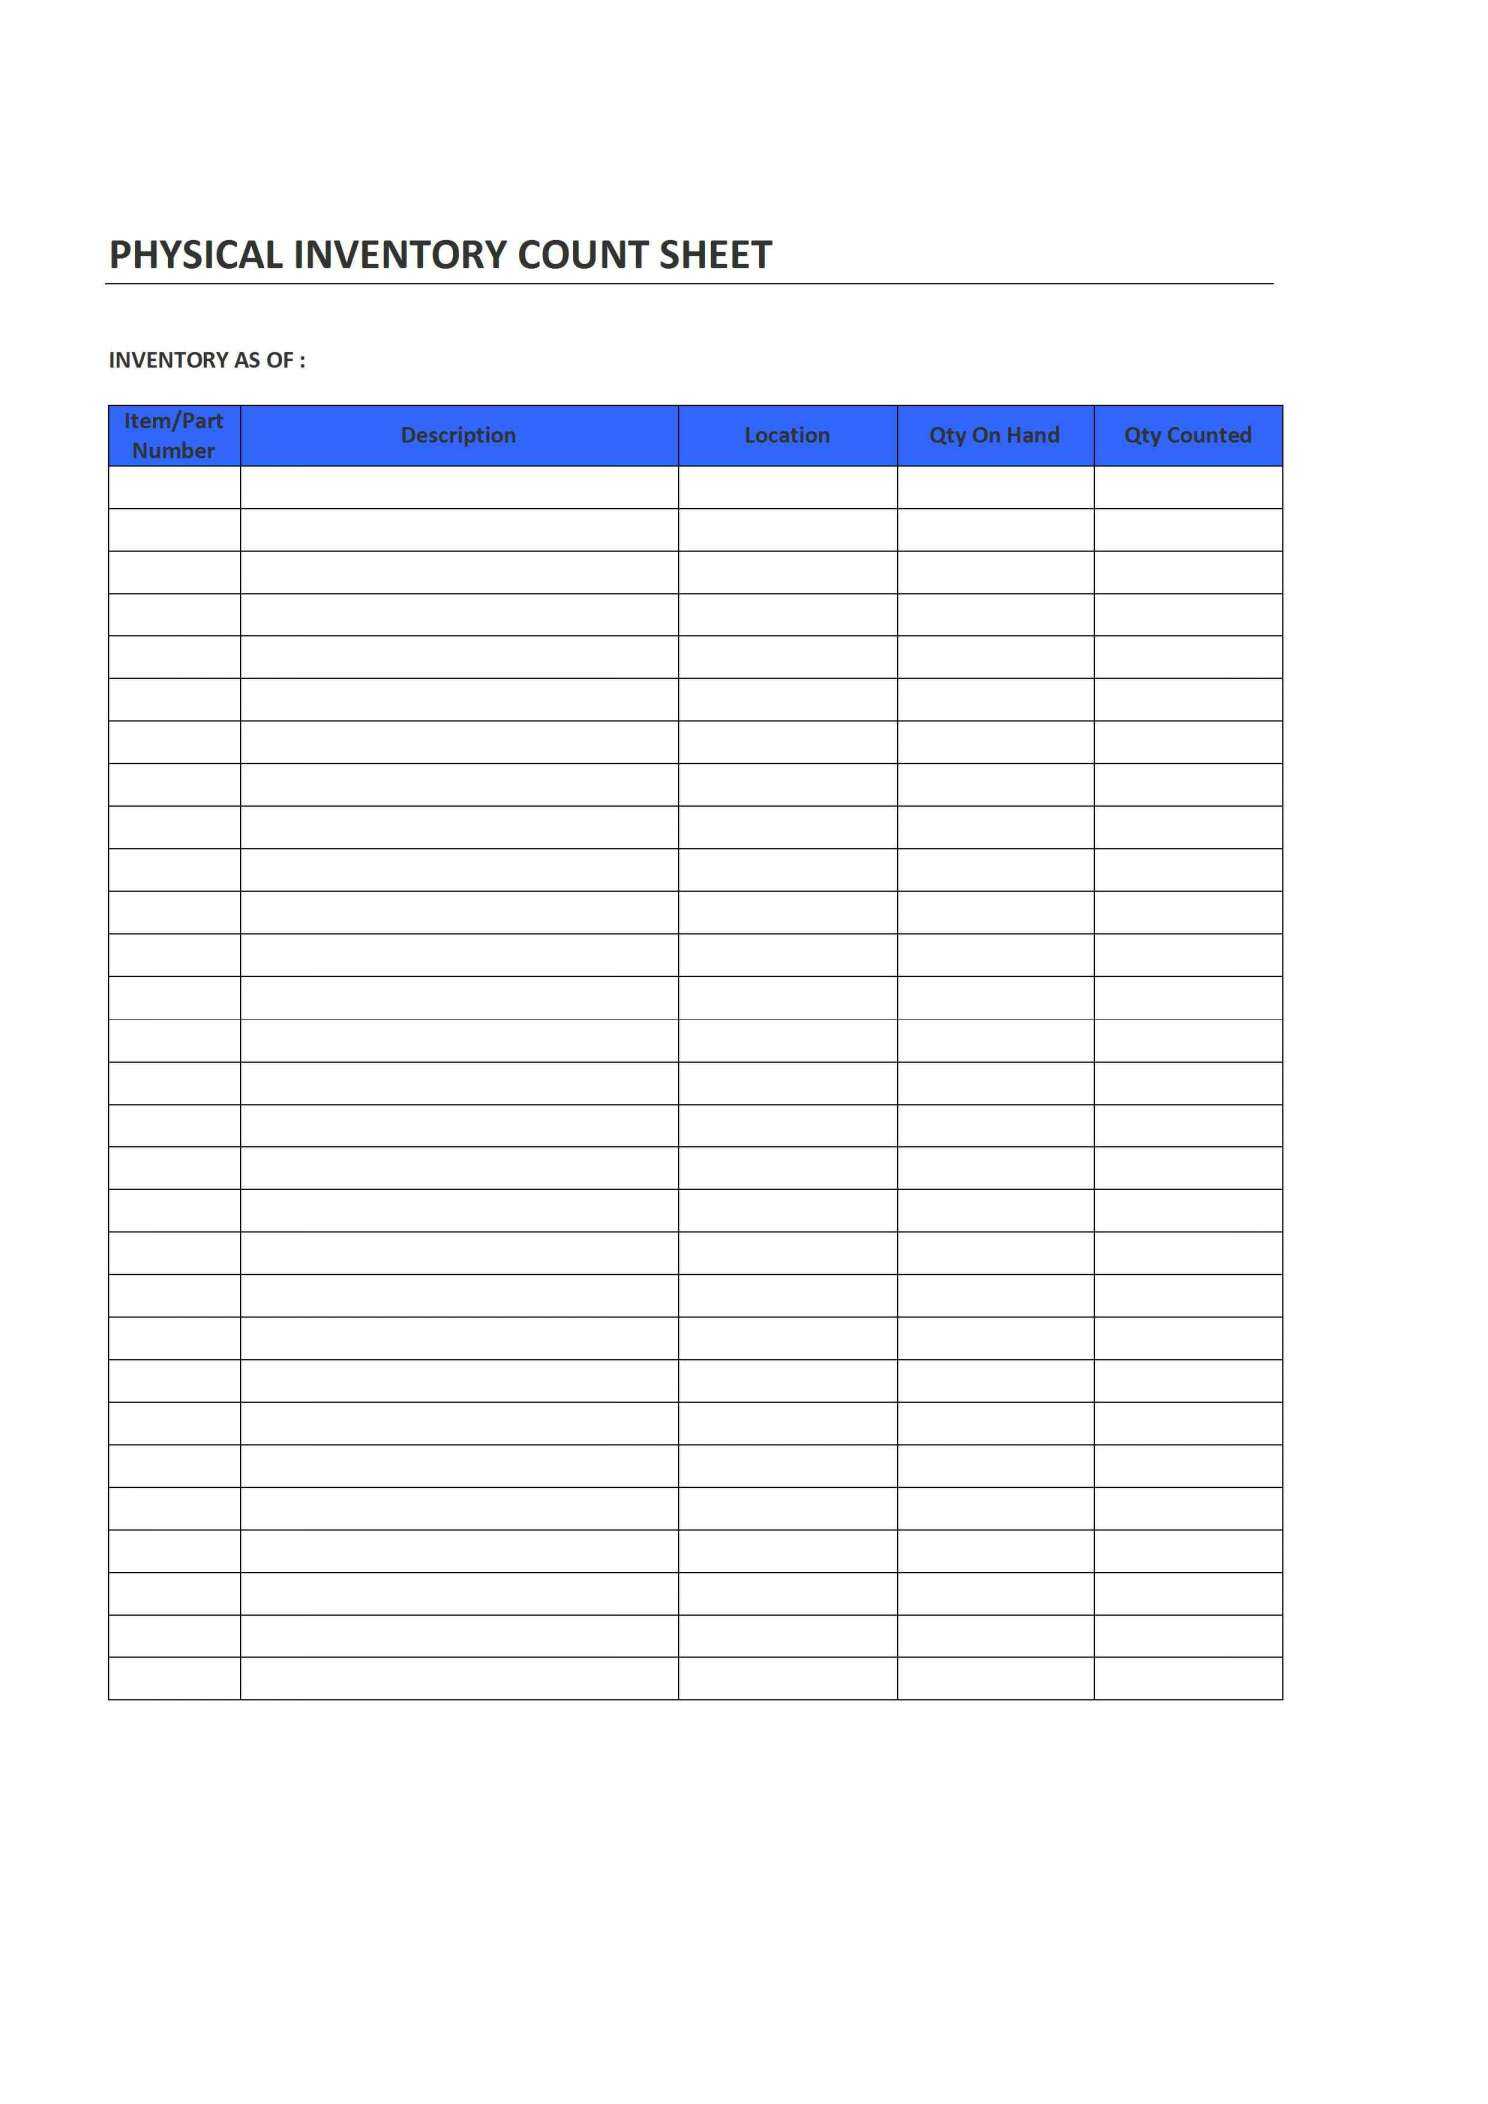 Point Slope form Practice Worksheet Along with Retirement Planning Spreadsheet or Physical Inventory Count Sheet